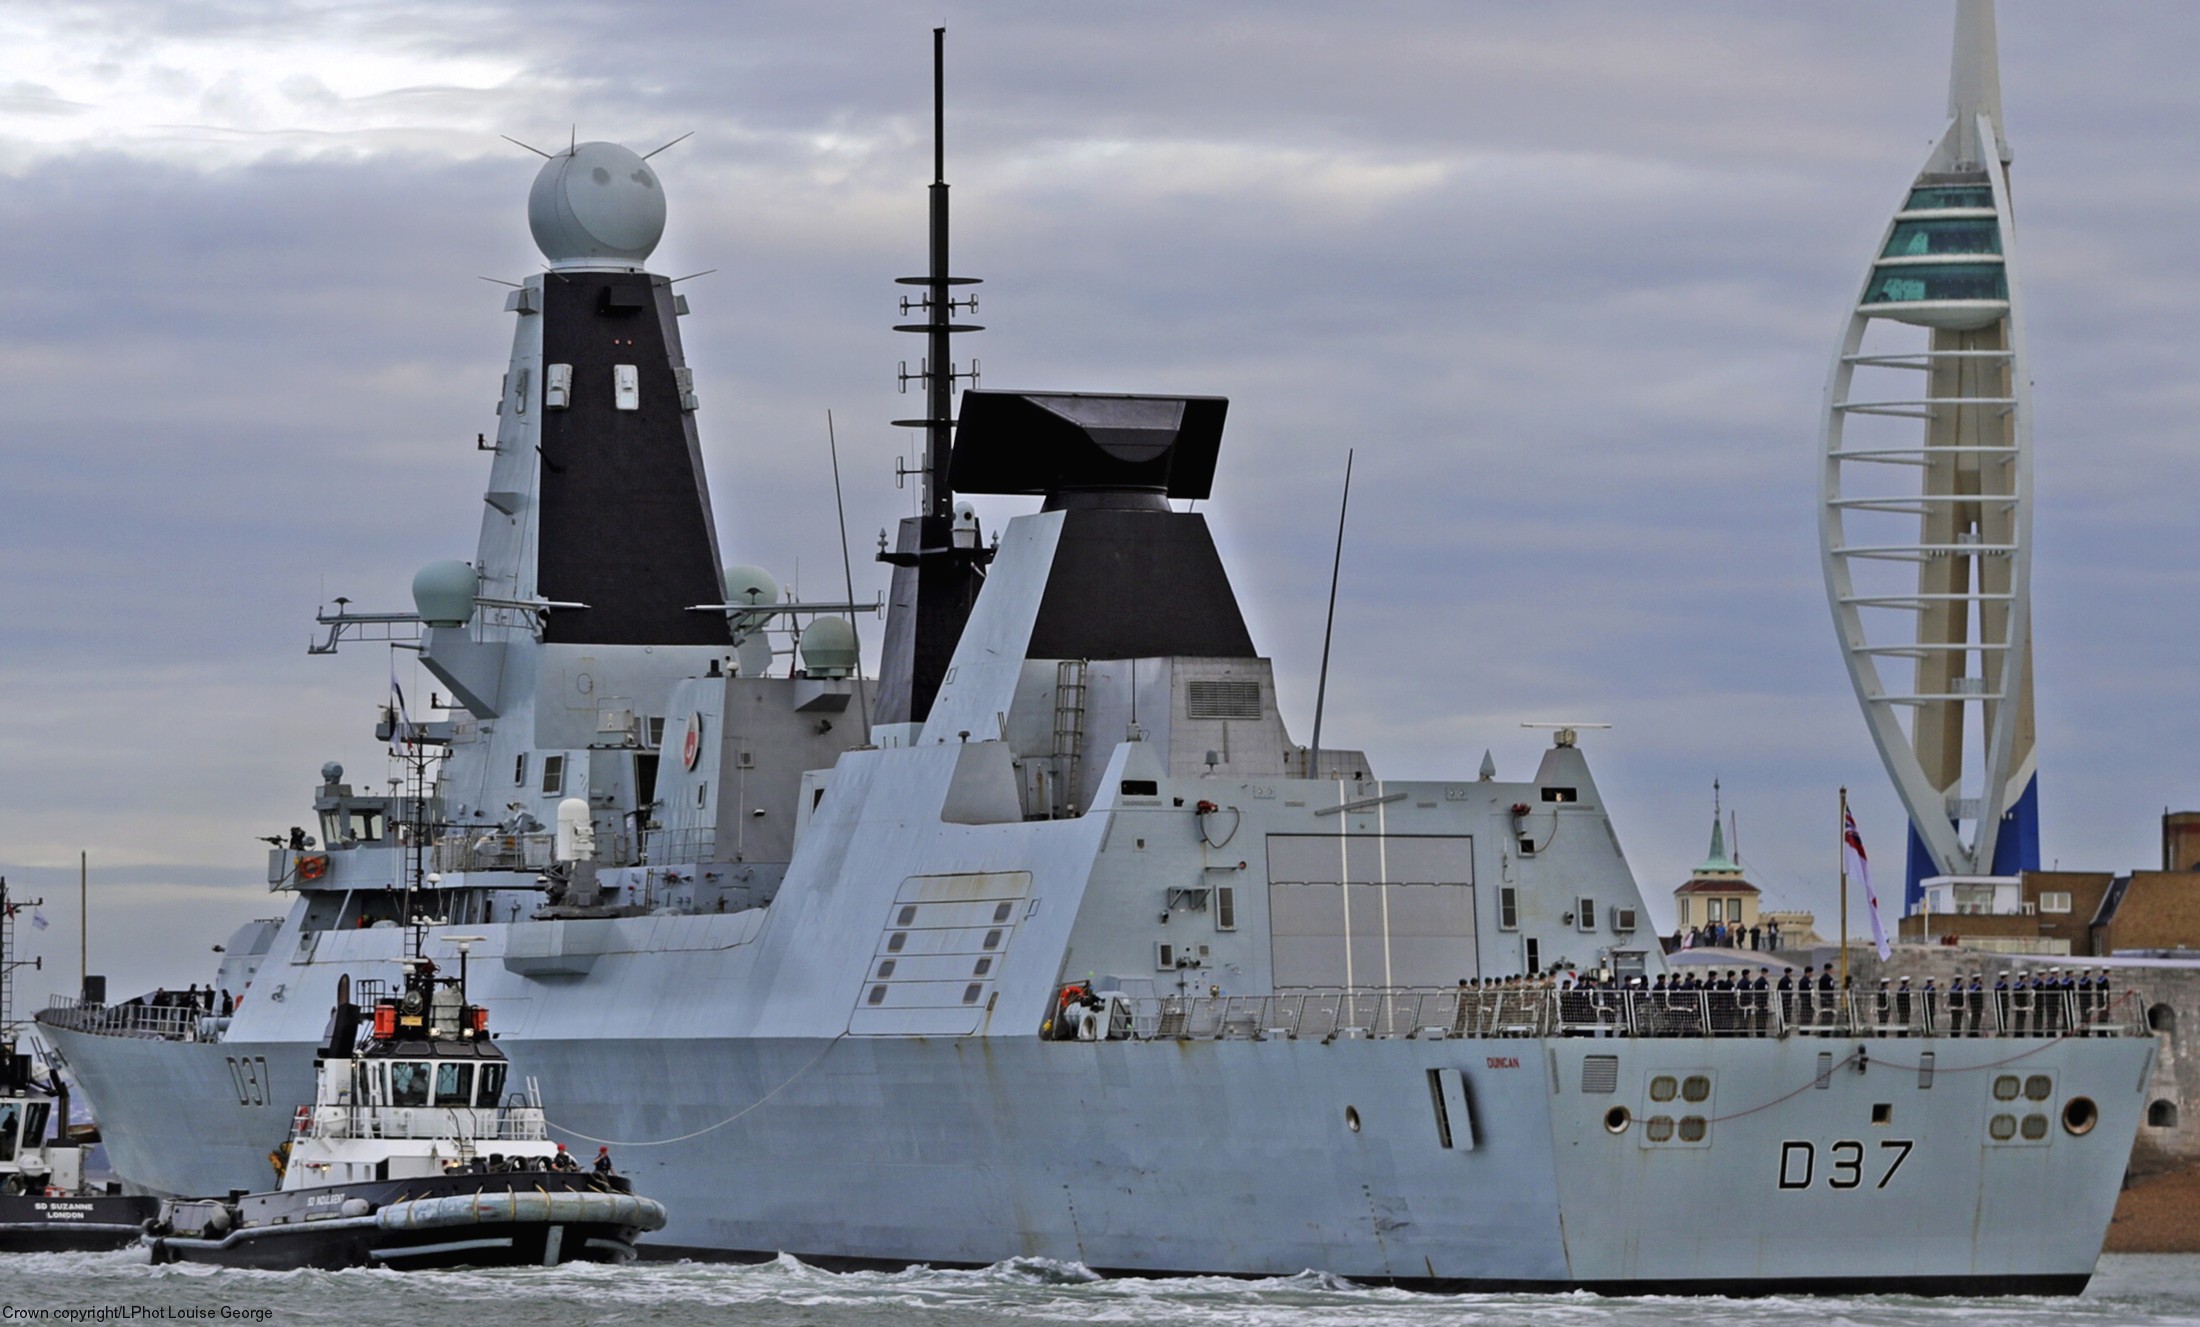 hms duncan d-37 type 45 daring class guided missile destroyer ddg royal navy sea viper paams 23 hmnb portsmouth